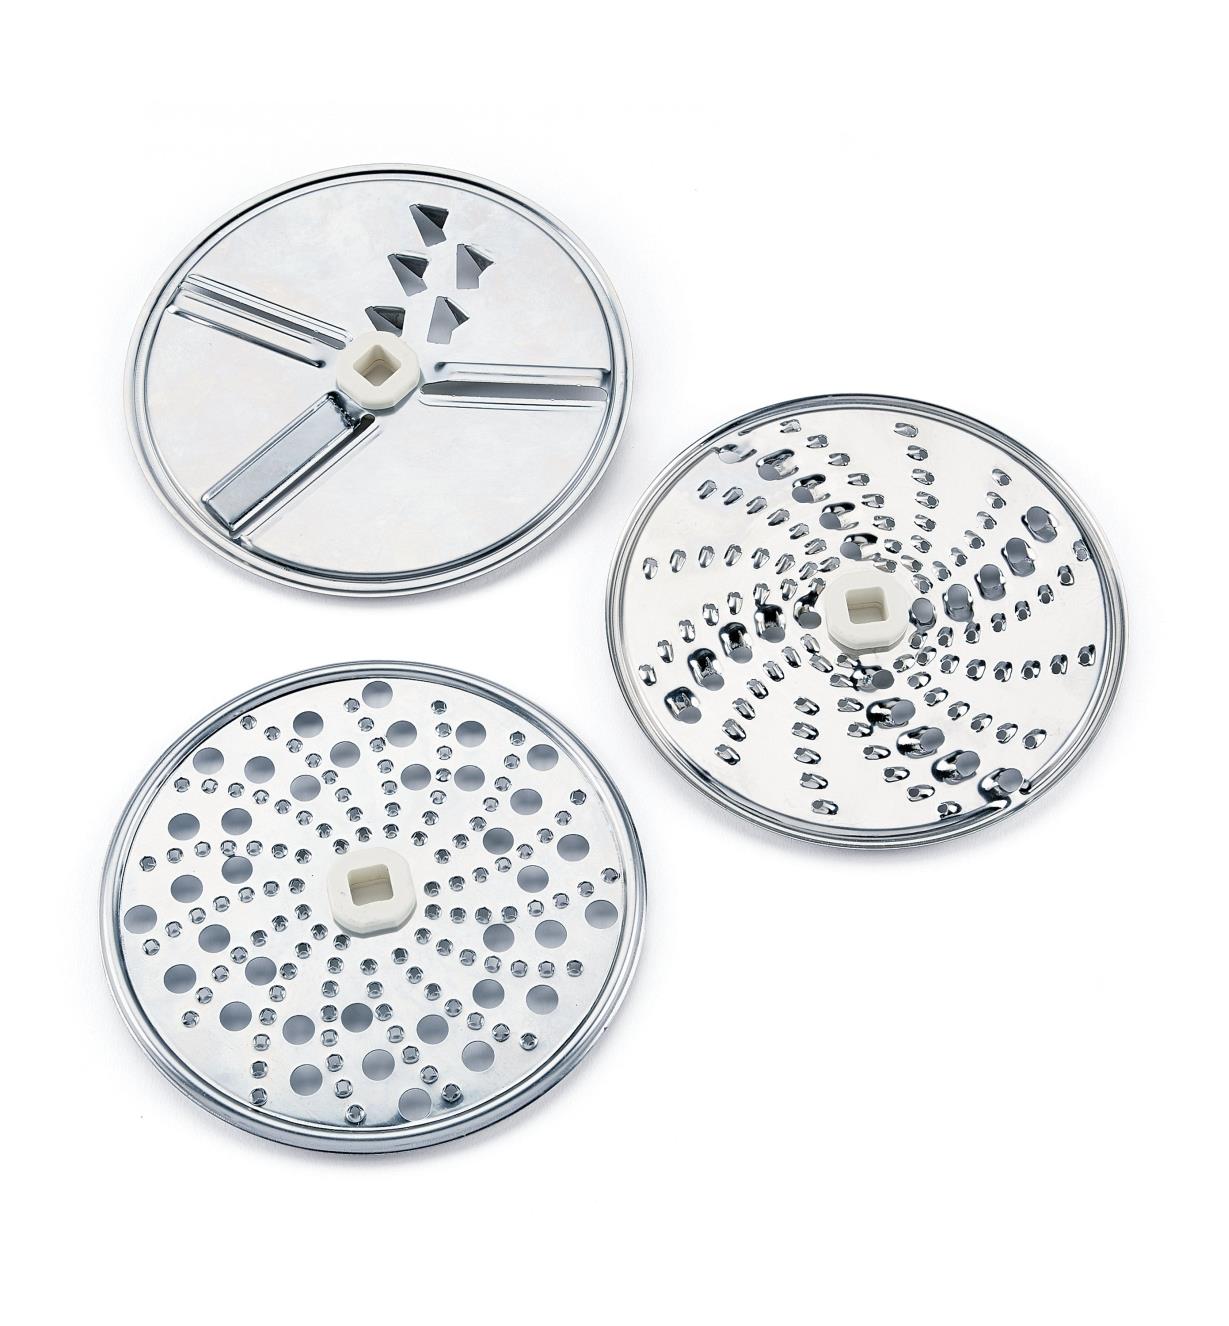 The three stainless-steel discs that are included